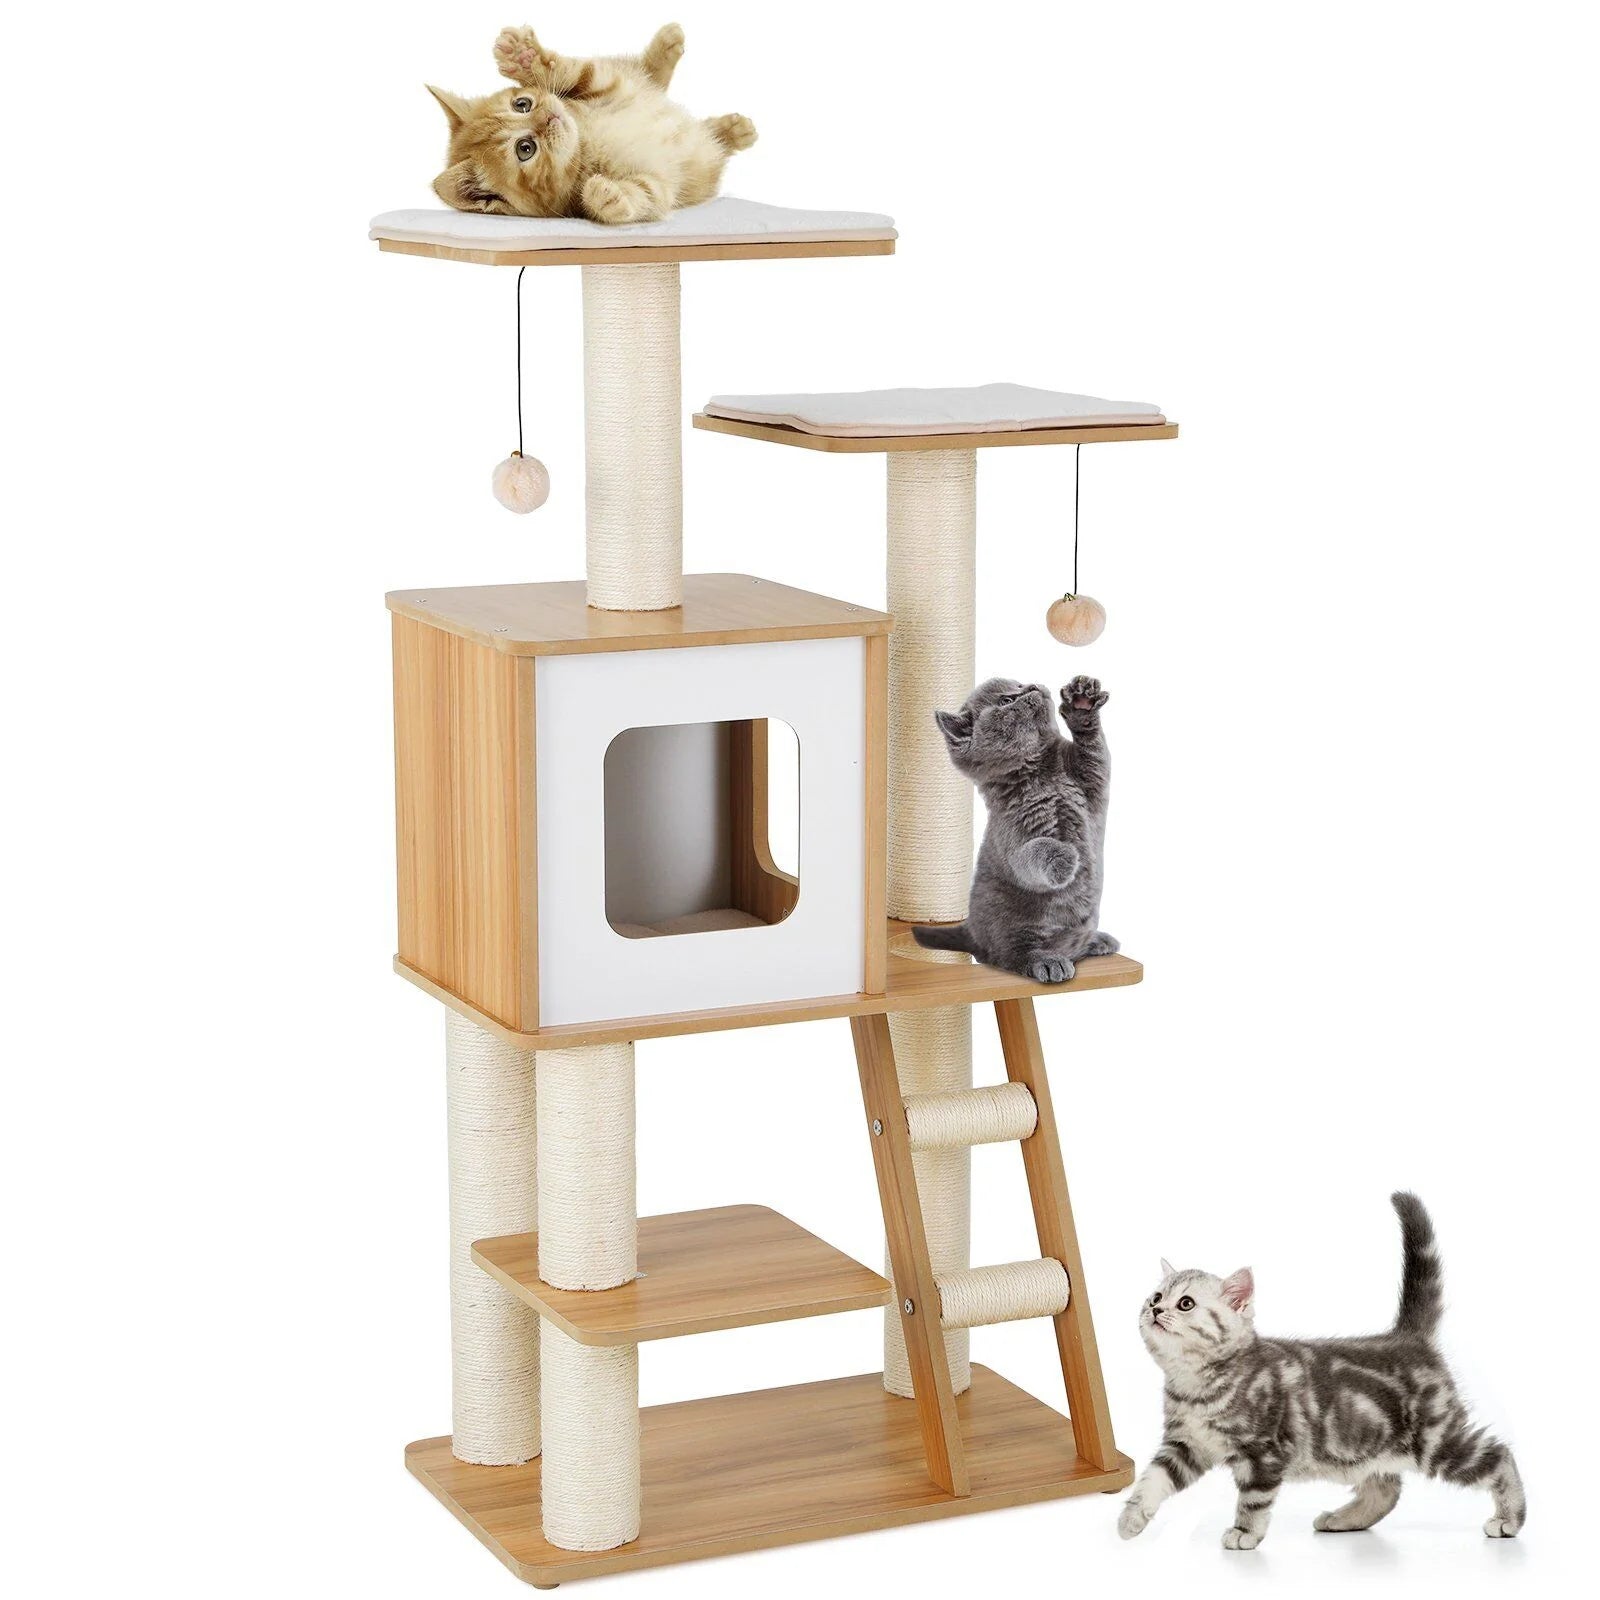 kittens playing at a three level deluxe wooden cat tree tower with interactive attached fur ball